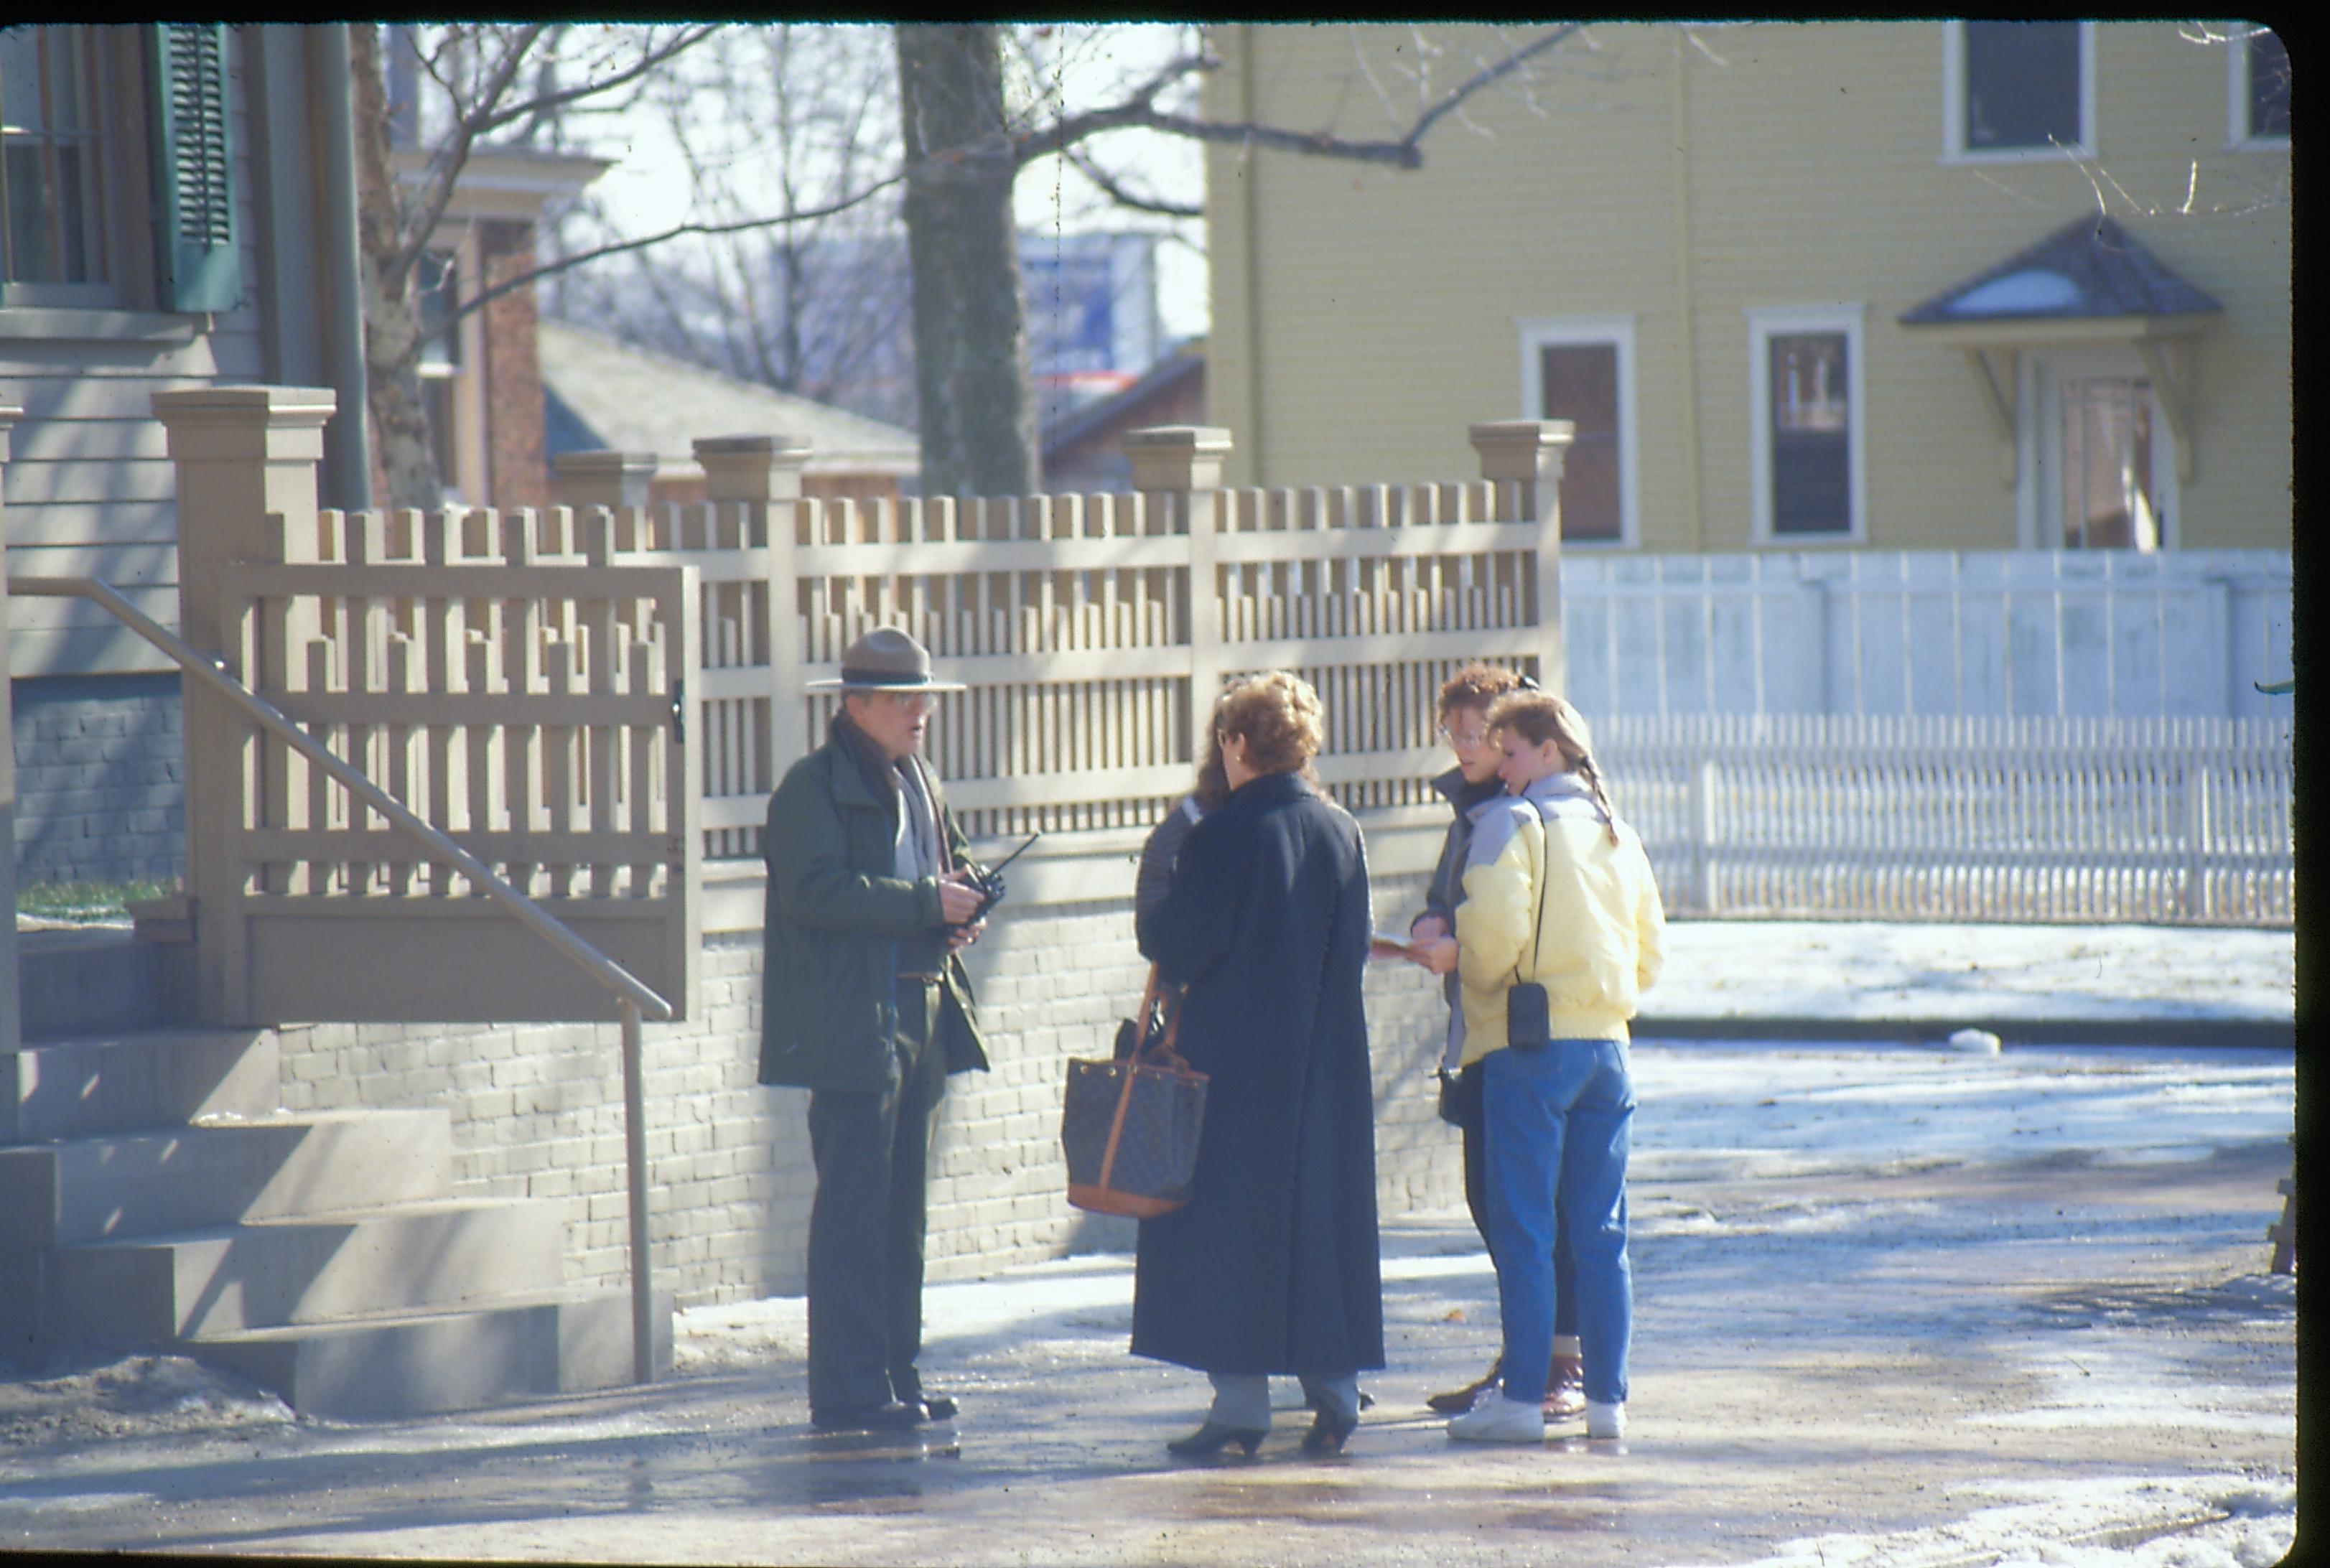 A ranger speaks to a small group of visitors on the brick plaza of the Lincoln Home. The Cook House can be seen in the background. Winter view. Photographer facing south east.